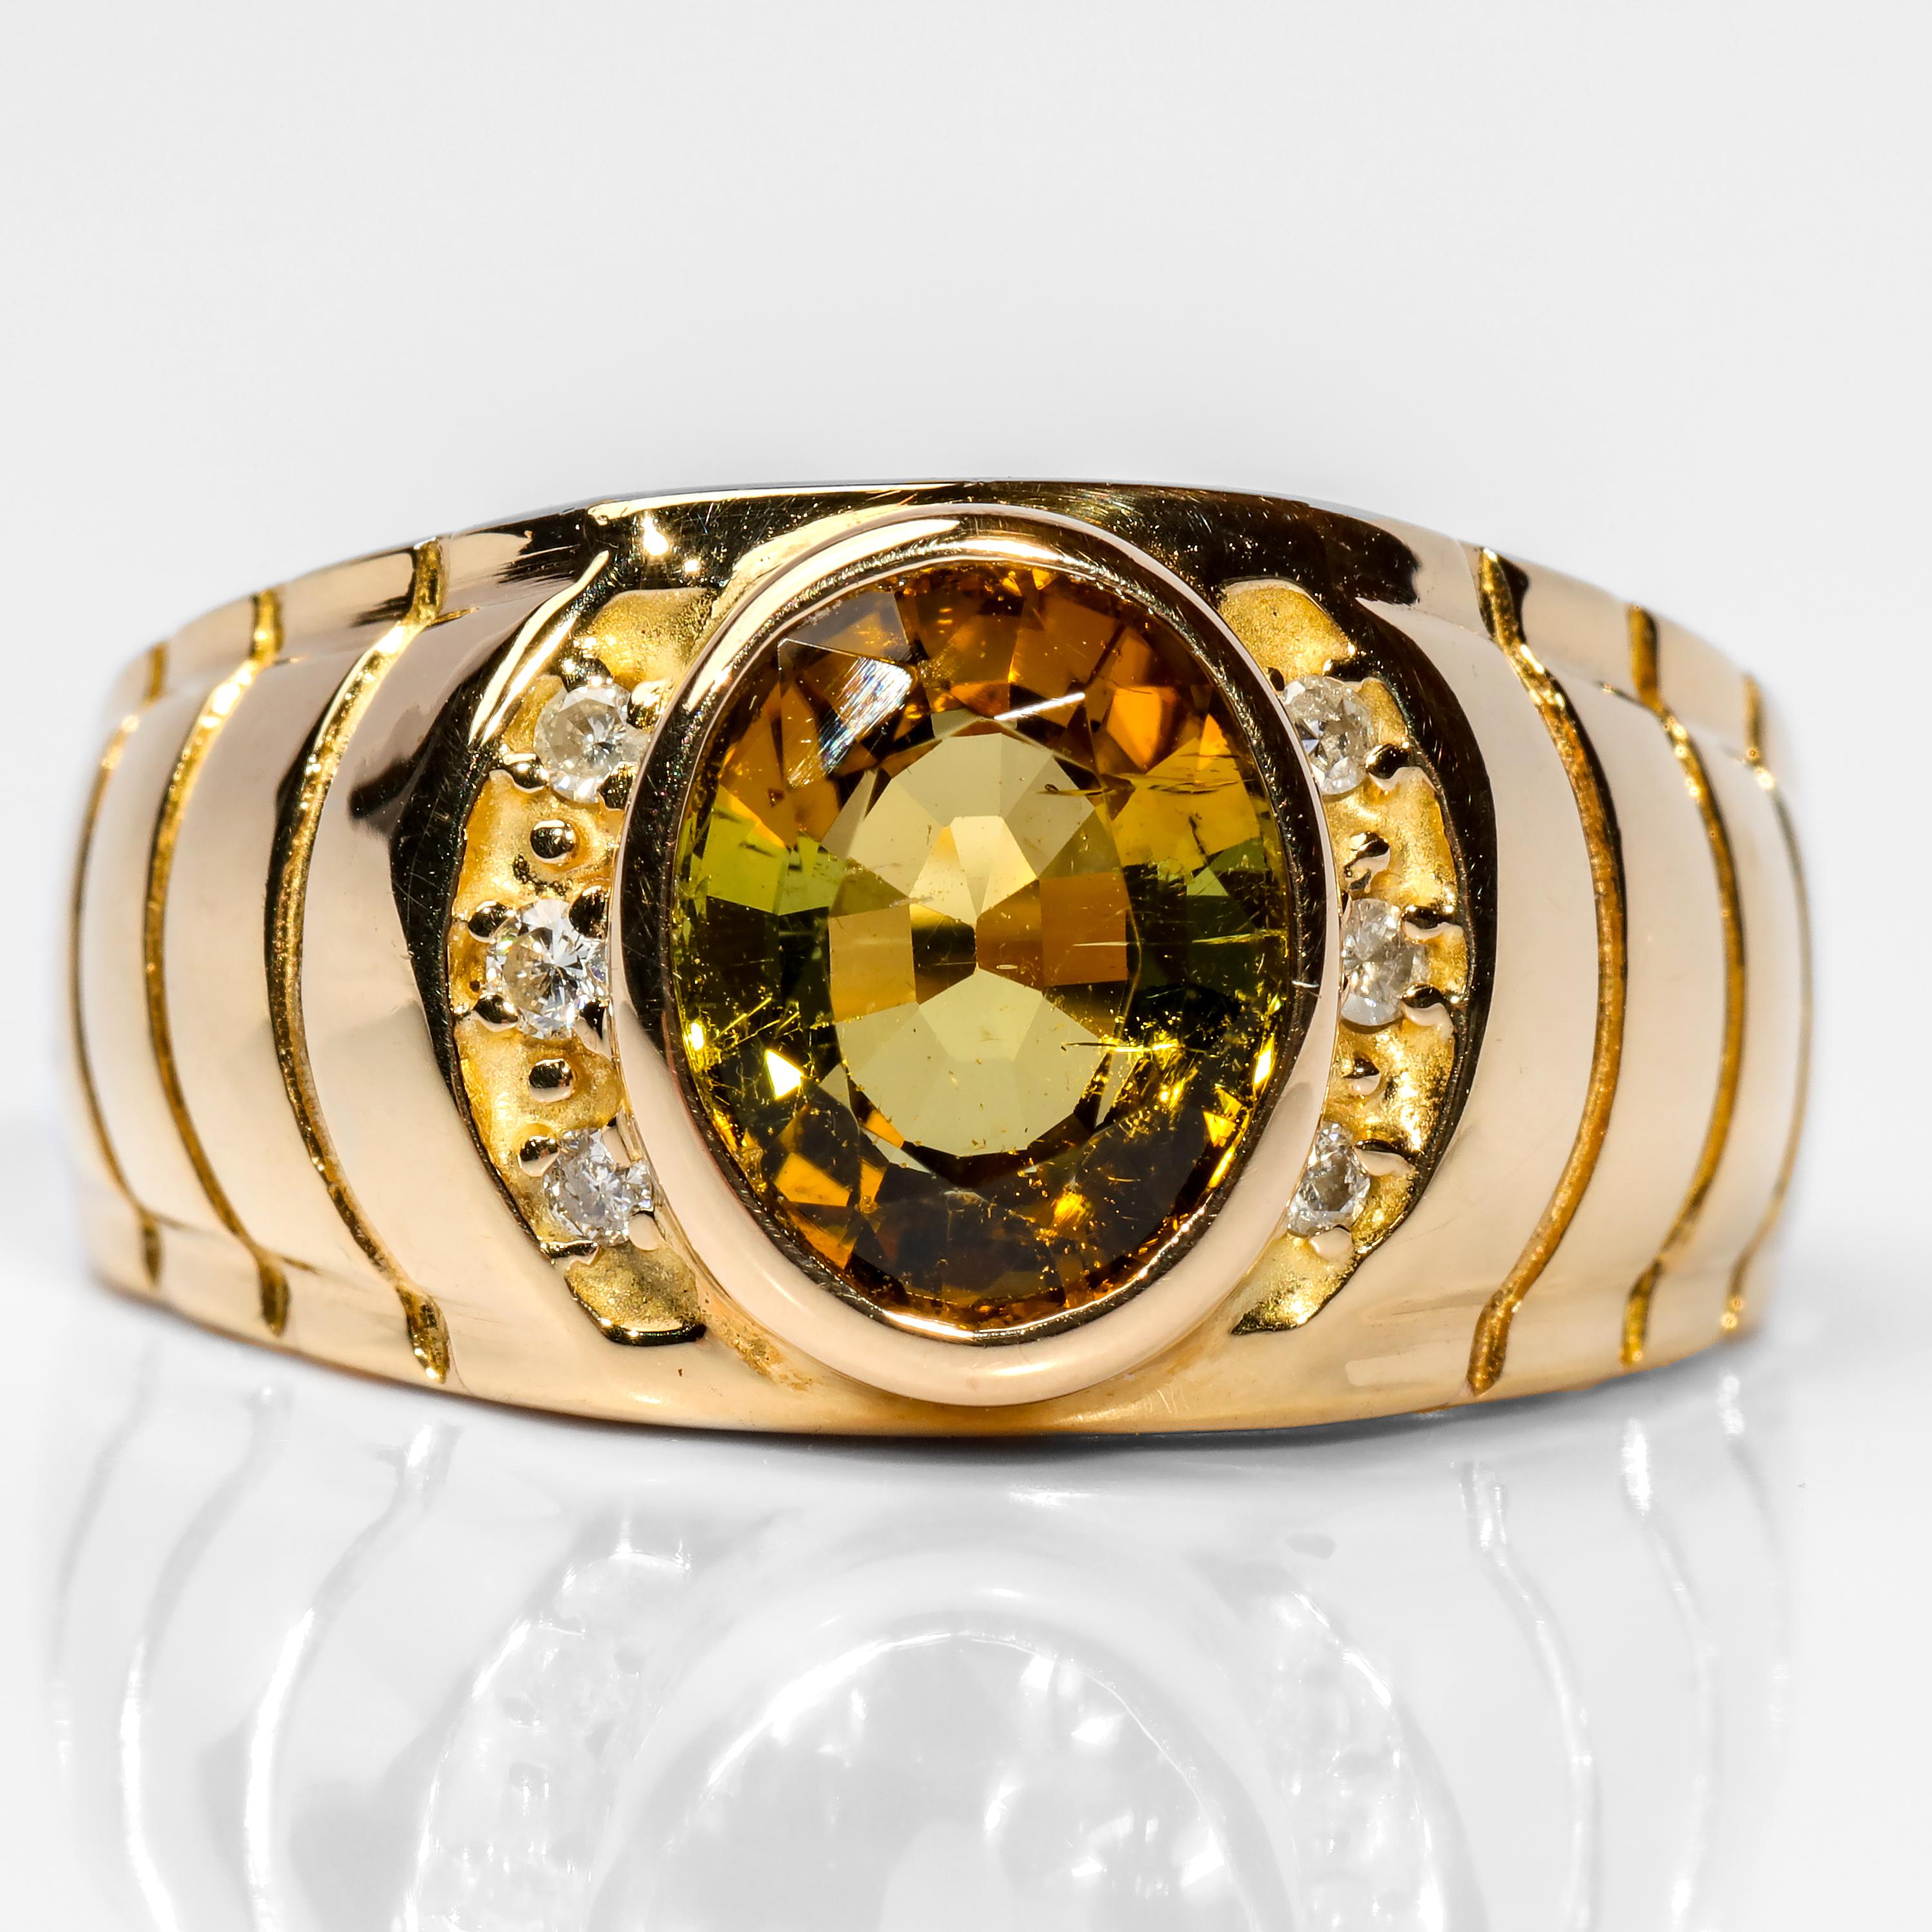 This vintage 1980s 14K yellow gold and diamond men's ring features quite the curiosity: the greenish-yellow and golden brown tourmaline bezel-set front and center is certified by Stone Group Labs as a 